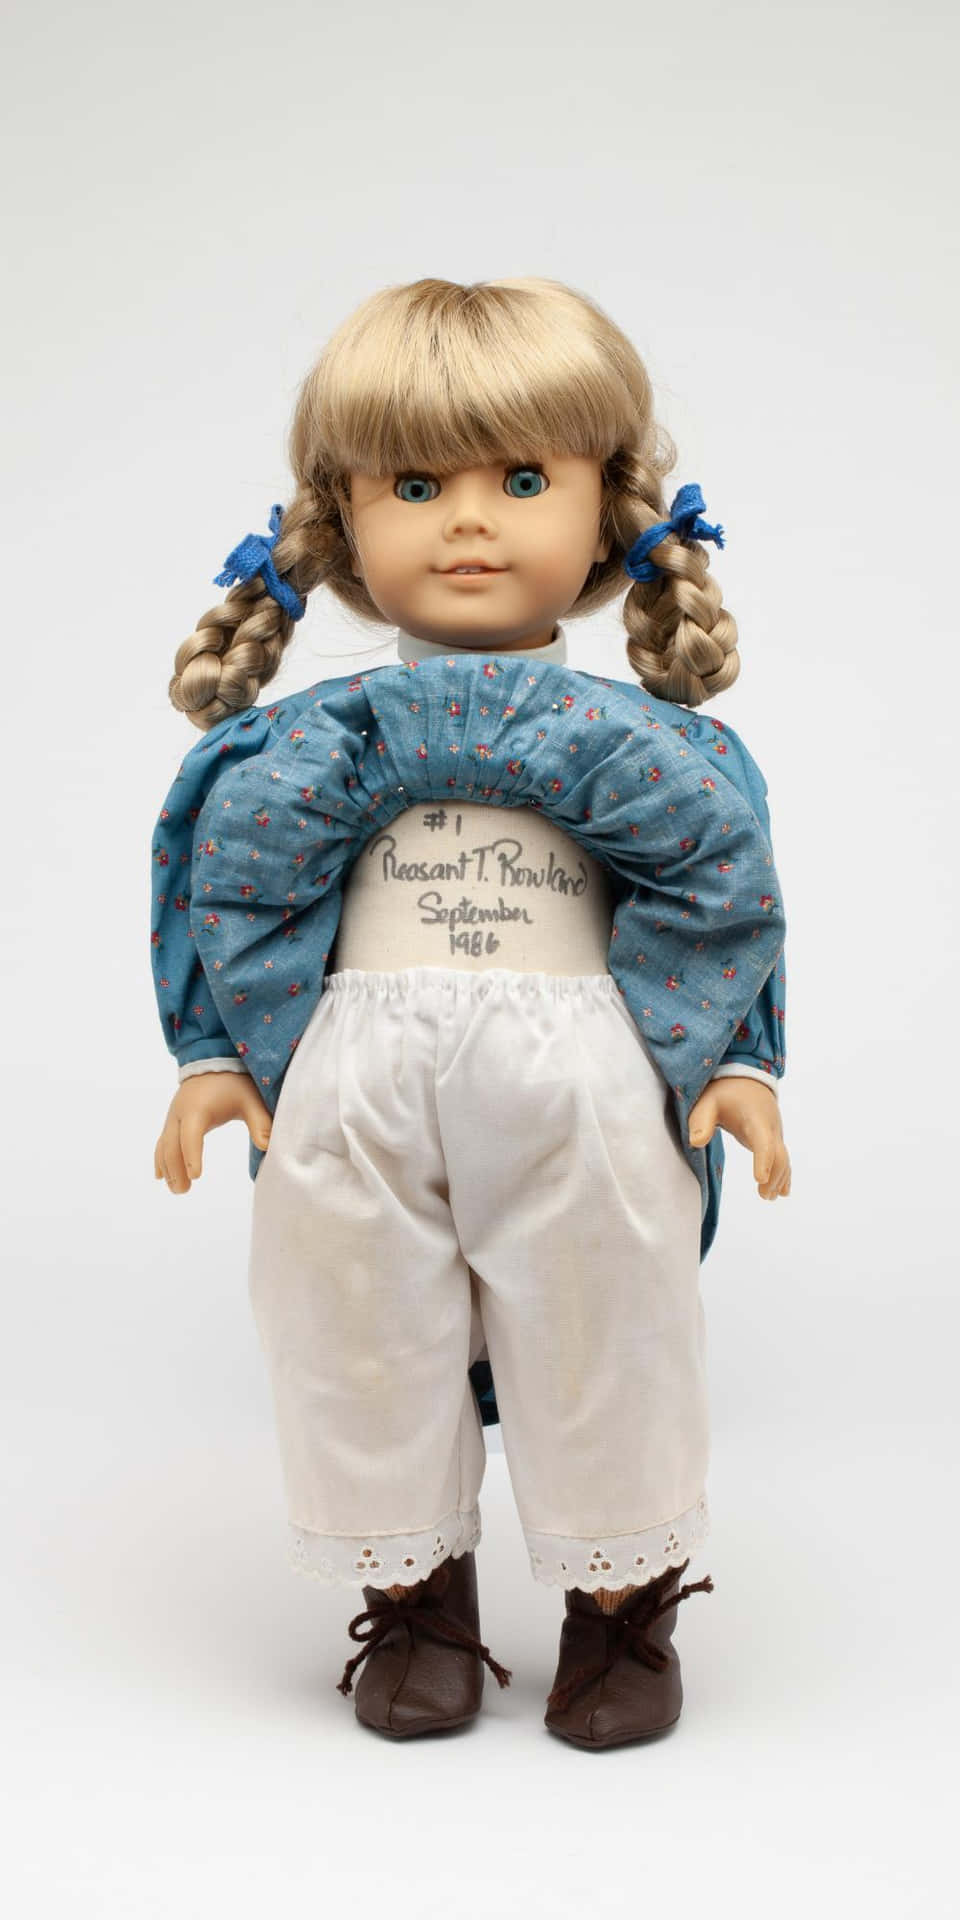 A Doll With Blonde Hair And Blue Pants